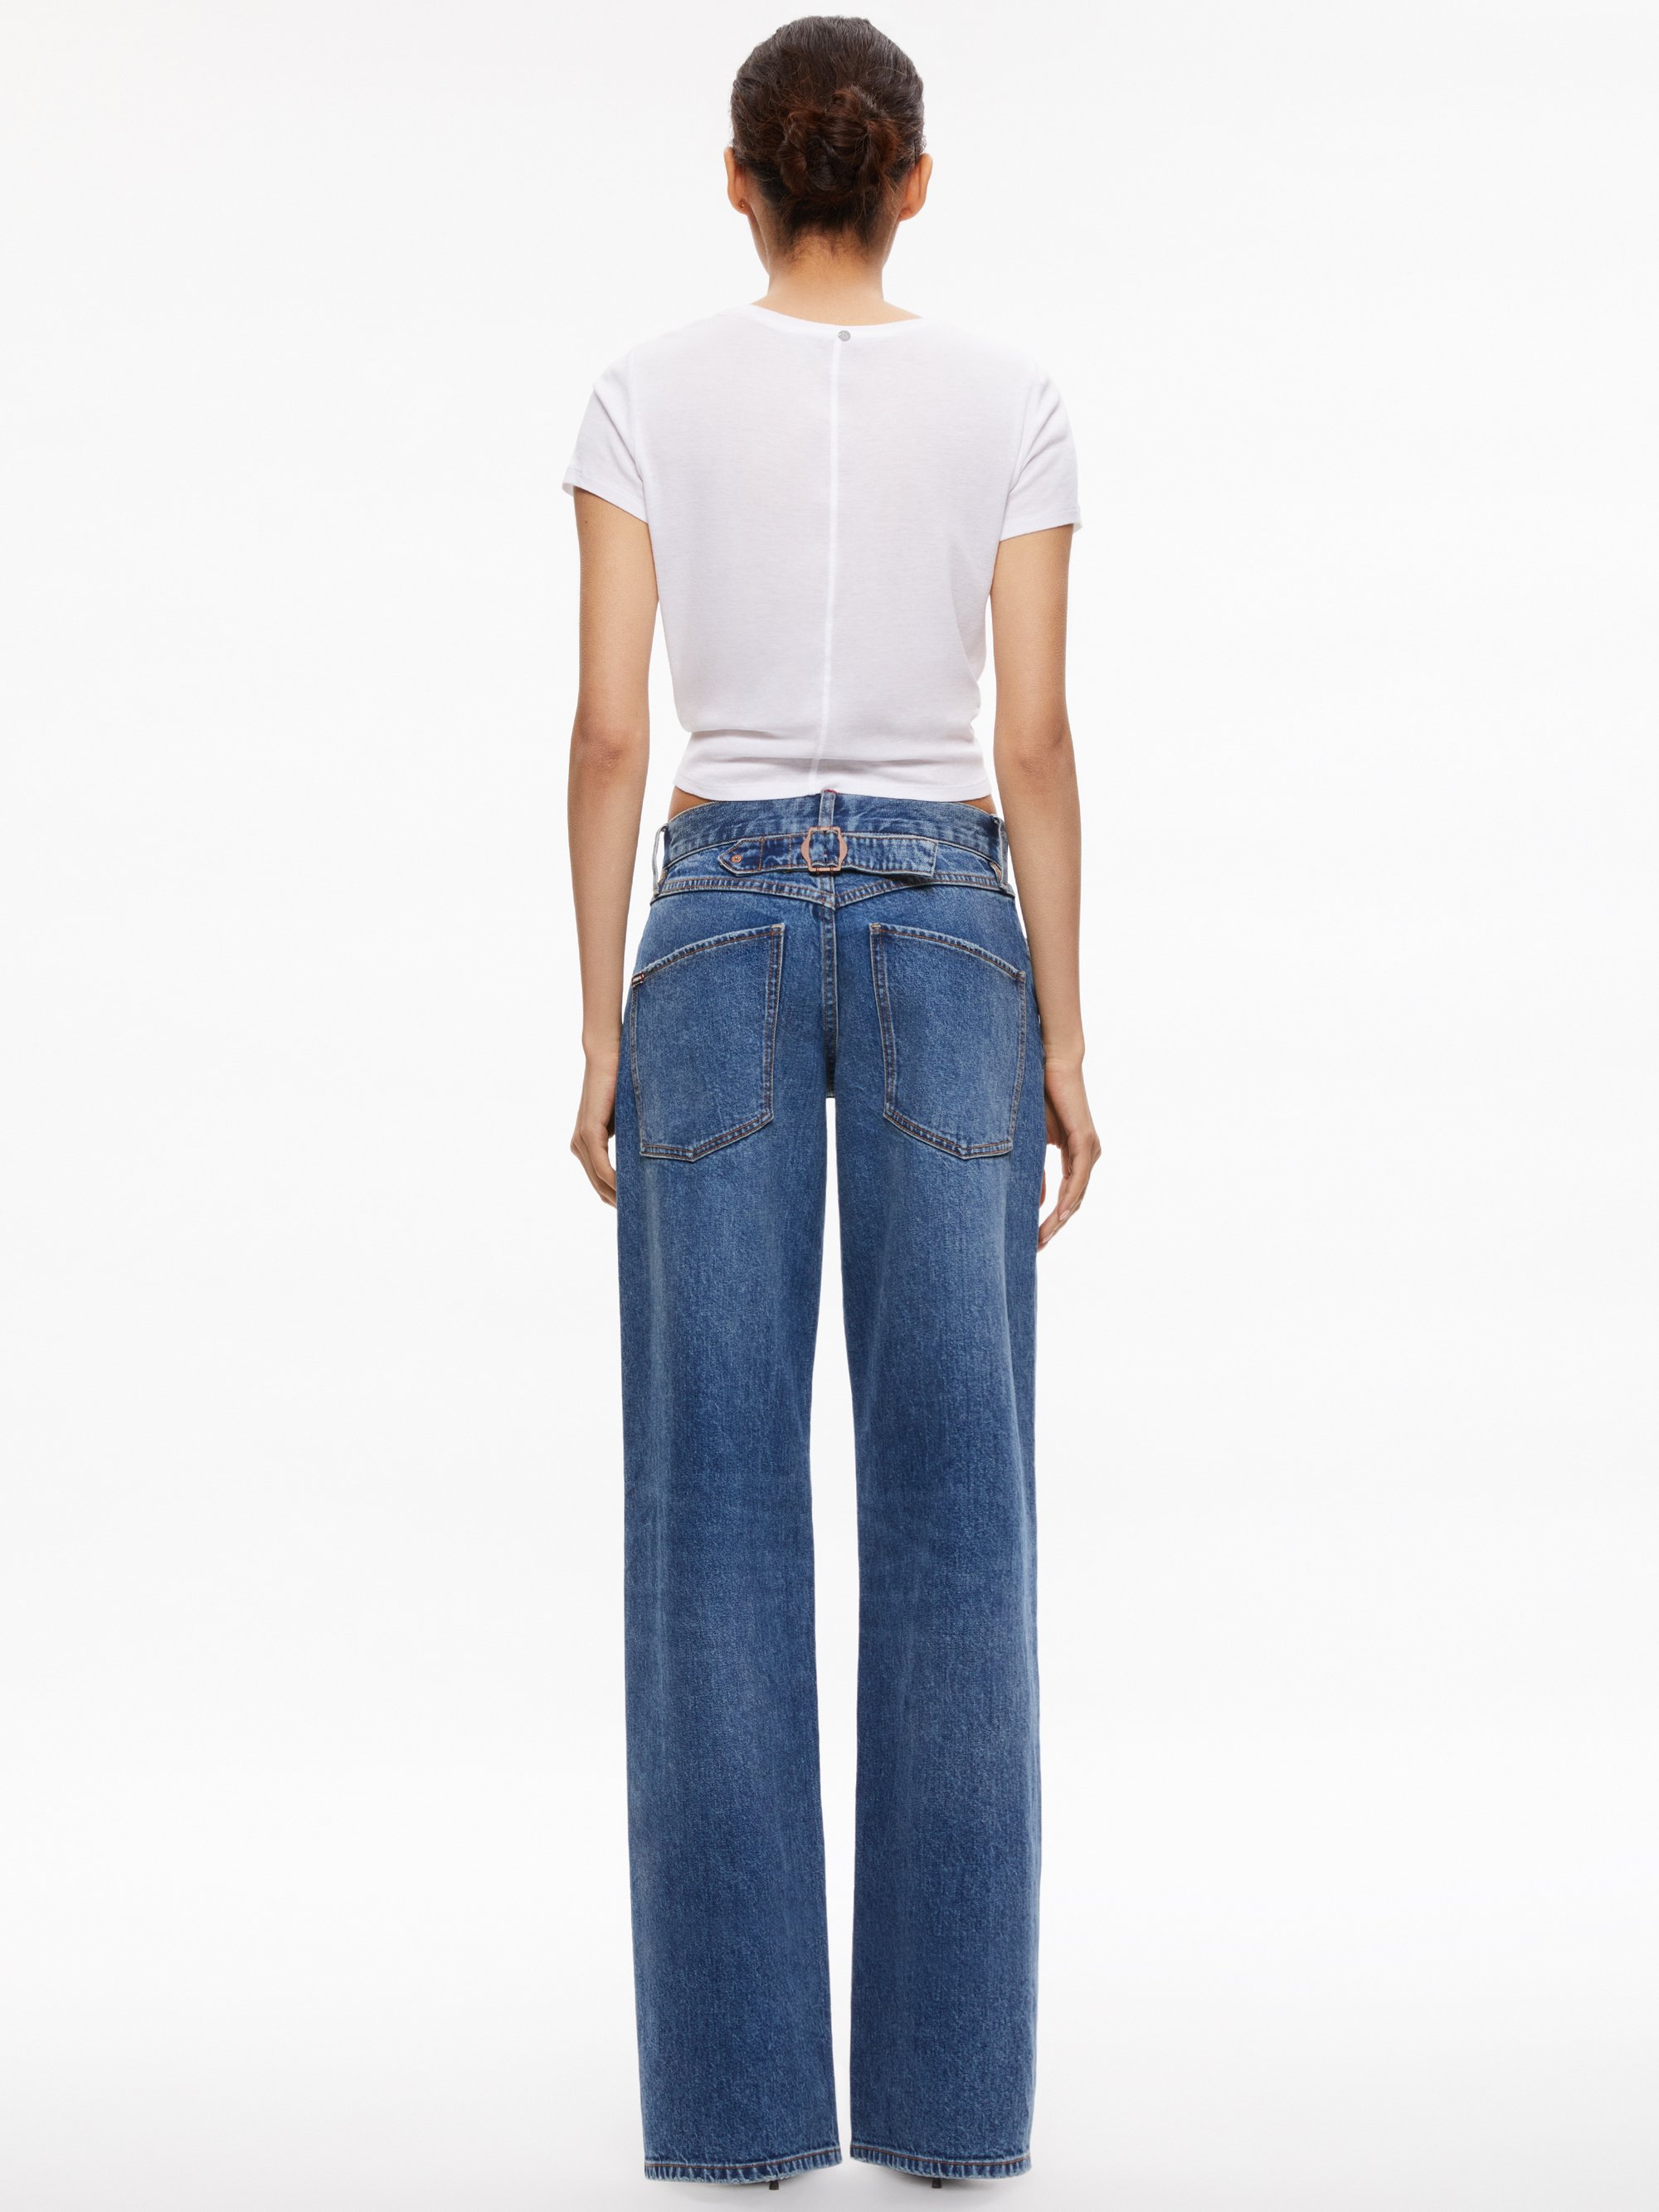 Ernie Low Rise Buckle Back Jean In Avery Blue | Alice And Olivia